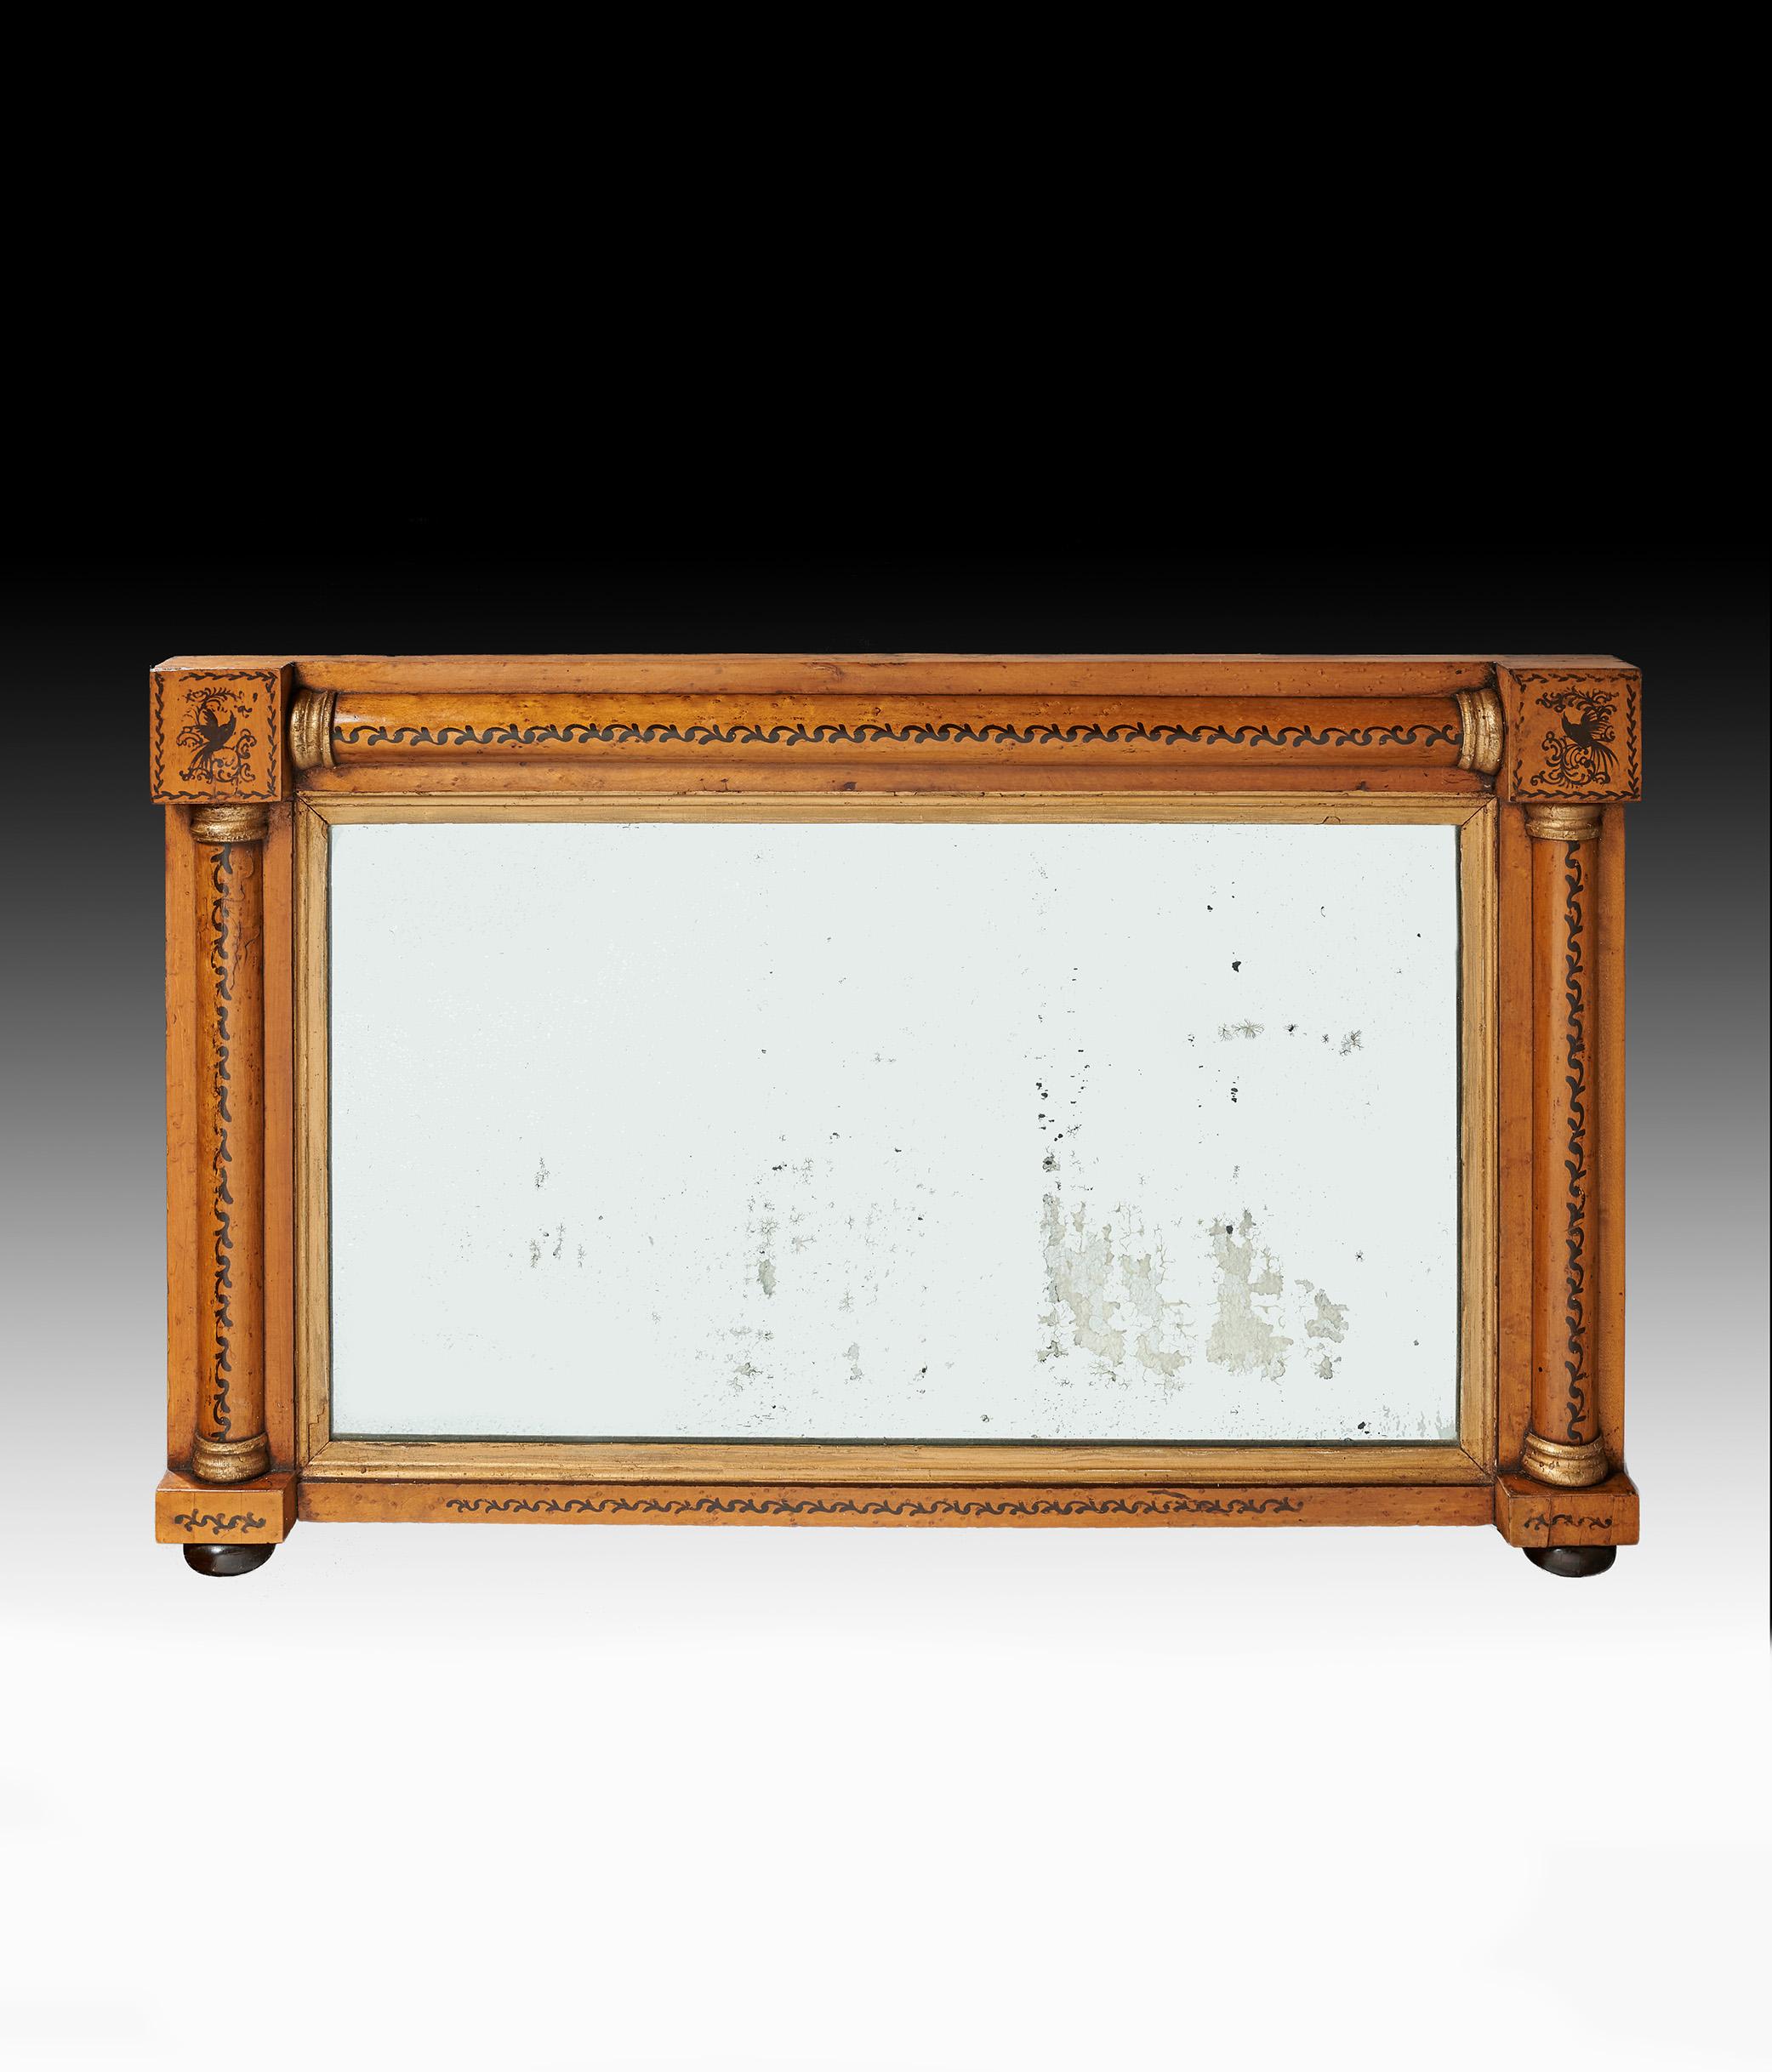 A Regency maple, gilt and penwork overmantel mirror retaining the original plate.

English circa 1820

An attractive Regency overmantel mirror within a bird's-eye maple frame having half columns to the sides and top with gilded capitals and gilt